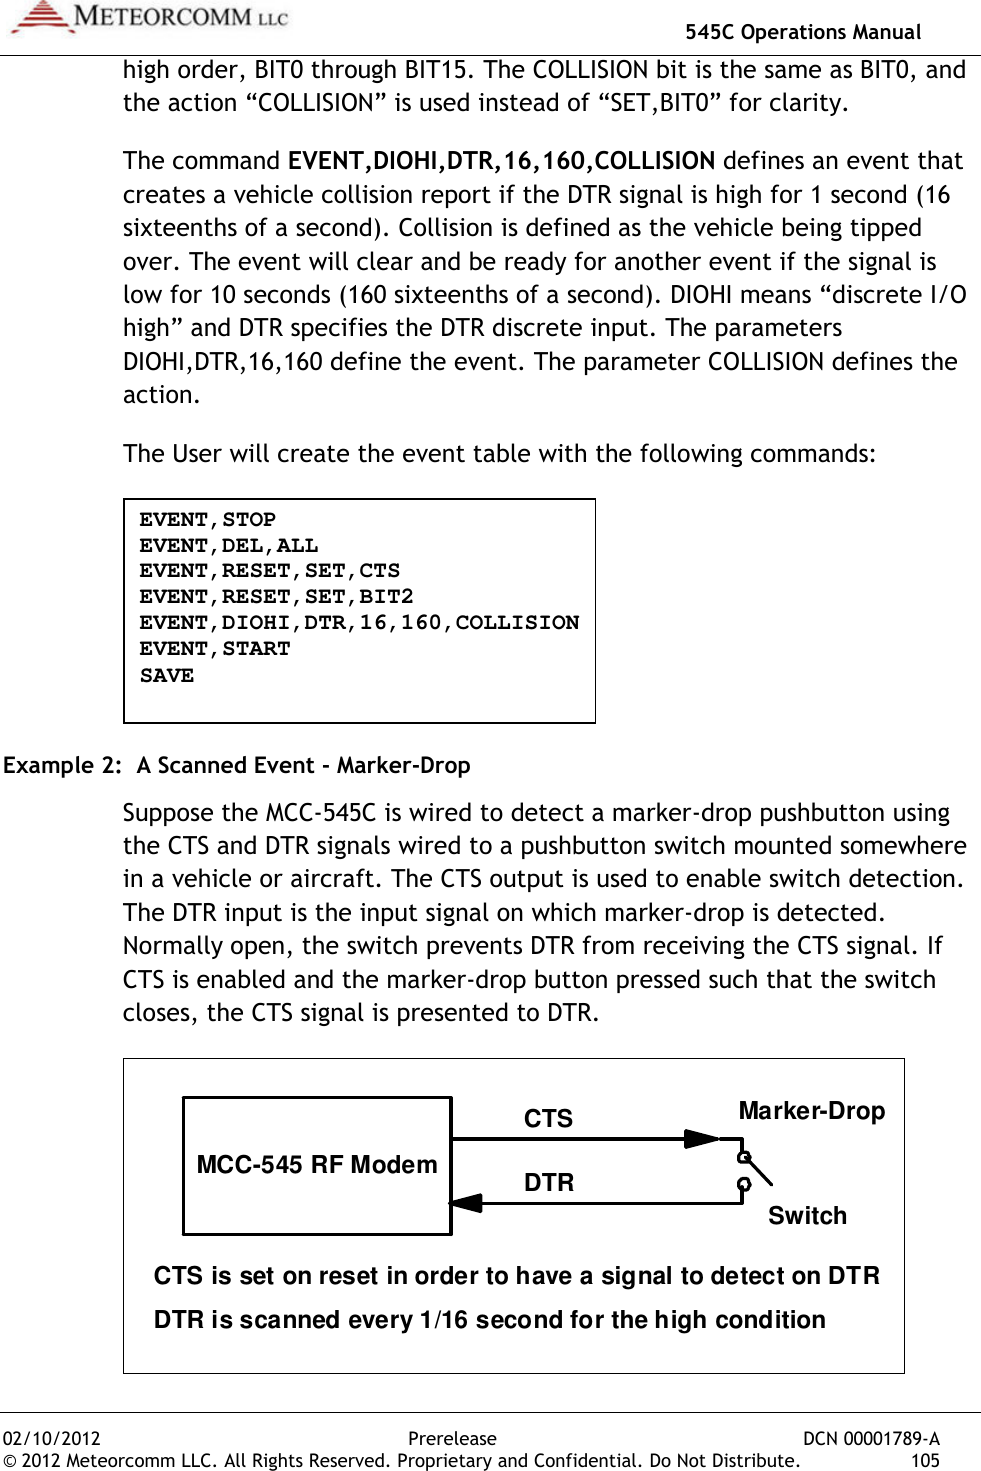   545C Operations Manual 02/10/2012  Prerelease  DCN 00001789-A © 2012 Meteorcomm LLC. All Rights Reserved. Proprietary and Confidential. Do Not Distribute.  105 high order, BIT0 through BIT15. The COLLISION bit is the same as BIT0, and the action “COLLISION” is used instead of “SET,BIT0” for clarity. The command EVENT,DIOHI,DTR,16,160,COLLISION defines an event that creates a vehicle collision report if the DTR signal is high for 1 second (16 sixteenths of a second). Collision is defined as the vehicle being tipped over. The event will clear and be ready for another event if the signal is low for 10 seconds (160 sixteenths of a second). DIOHI means “discrete I/O high” and DTR specifies the DTR discrete input. The parameters DIOHI,DTR,16,160 define the event. The parameter COLLISION defines the action. The User will create the event table with the following commands:  Example 2:  A Scanned Event - Marker-Drop Suppose the MCC-545C is wired to detect a marker-drop pushbutton using the CTS and DTR signals wired to a pushbutton switch mounted somewhere in a vehicle or aircraft. The CTS output is used to enable switch detection. The DTR input is the input signal on which marker-drop is detected. Normally open, the switch prevents DTR from receiving the CTS signal. If CTS is enabled and the marker-drop button pressed such that the switch closes, the CTS signal is presented to DTR.  MCC-545 RF Modem CTS DTR Marker-Drop Switch CTS is set on reset in order to have a signal to detect on DTR DTR is scanned every 1/16 second for the high condition  EVENT,STOP EVENT,DEL,ALL EVENT,RESET,SET,CTS EVENT,RESET,SET,BIT2 EVENT,DIOHI,DTR,16,160,COLLISION EVENT,START SAVE 